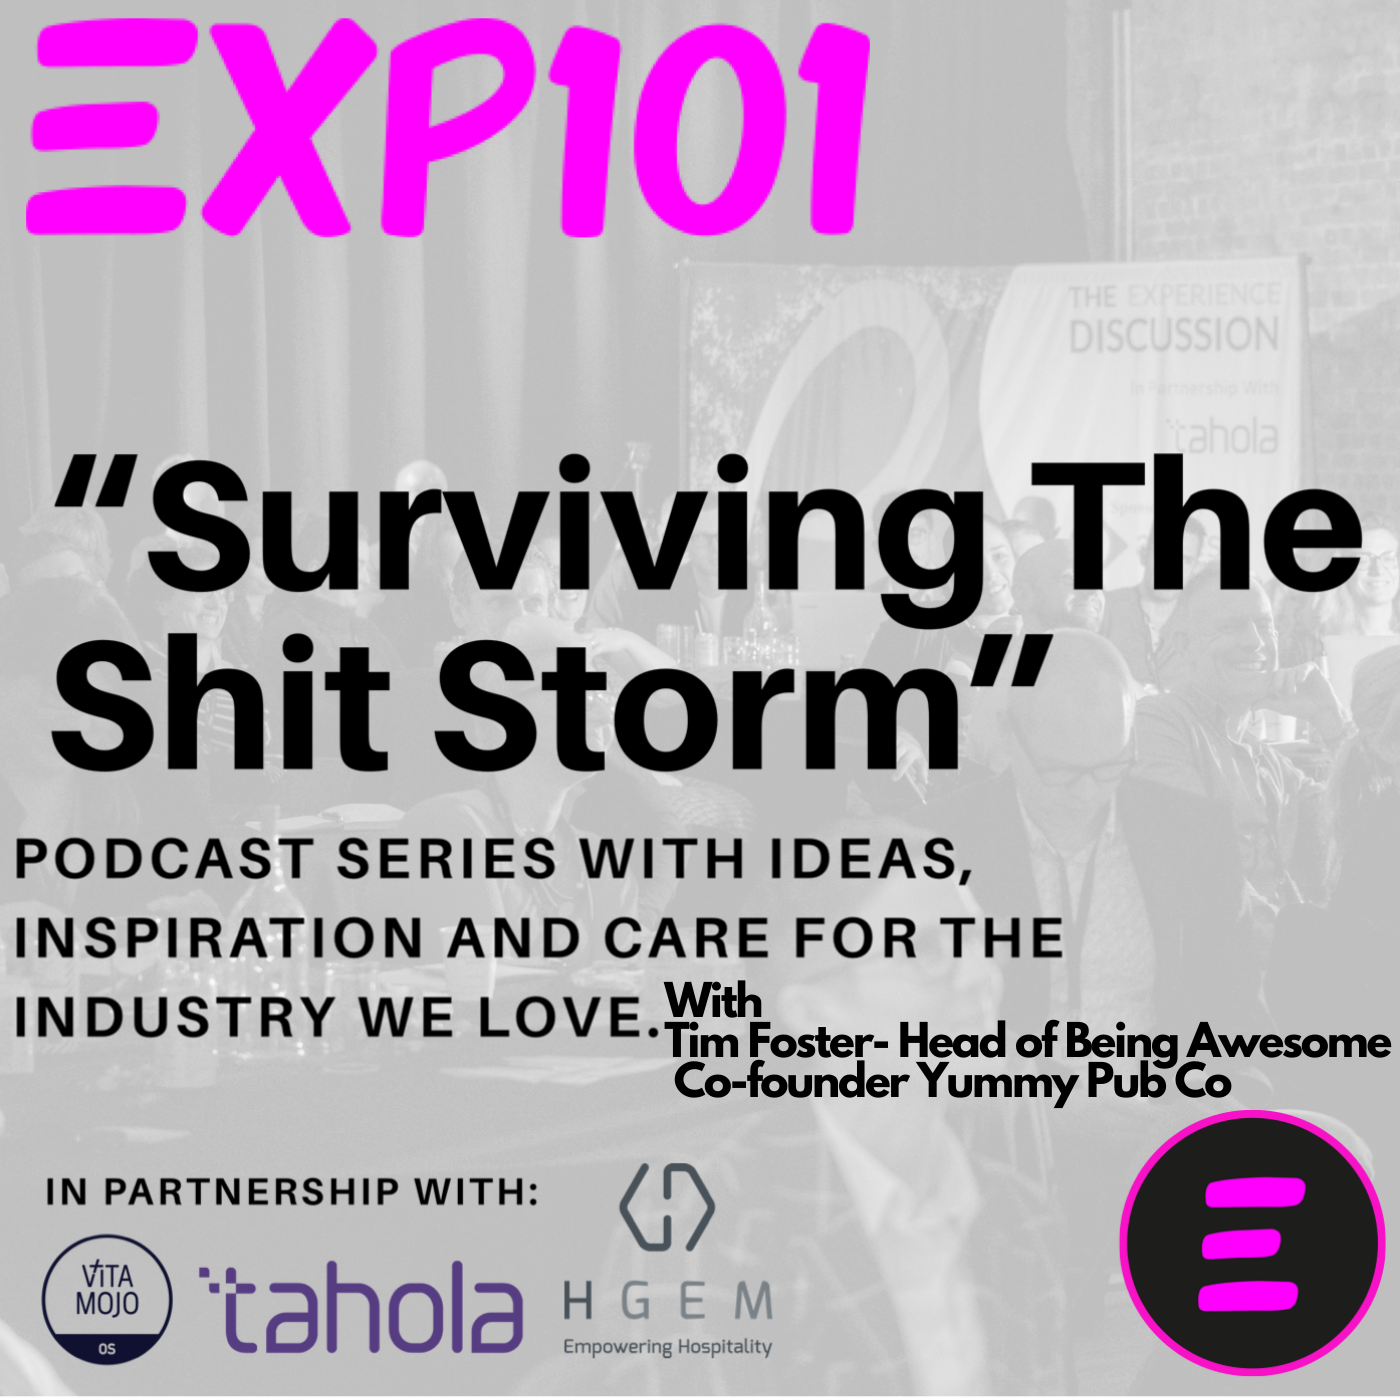 Surviving The Shit Storm Episode 12 with Tim Foster, Head of Being Awesome Image